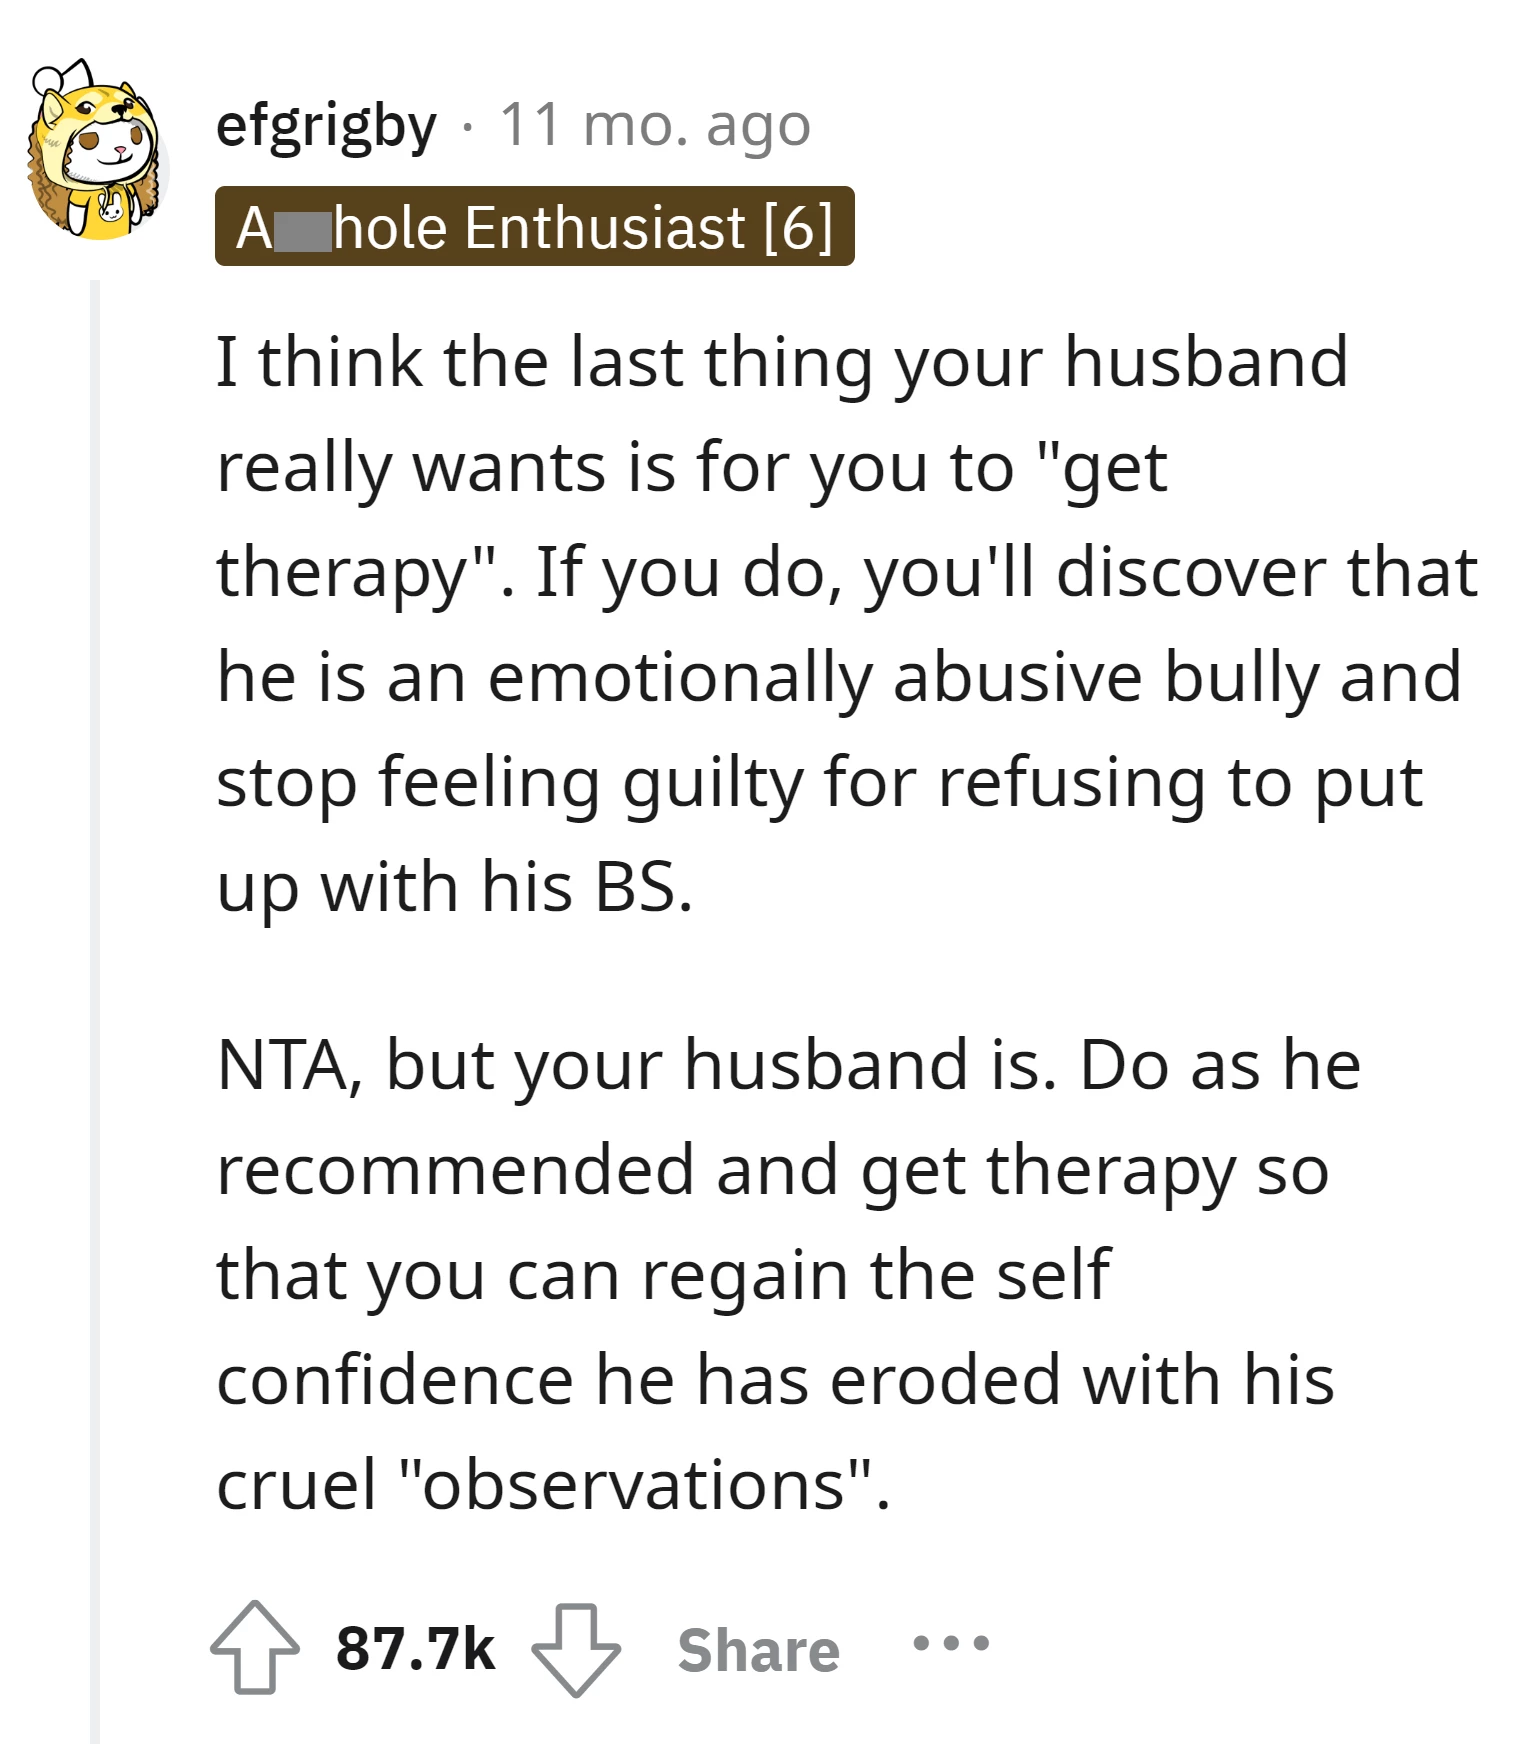 This Redditor labels OP's husband as emotionally abusive